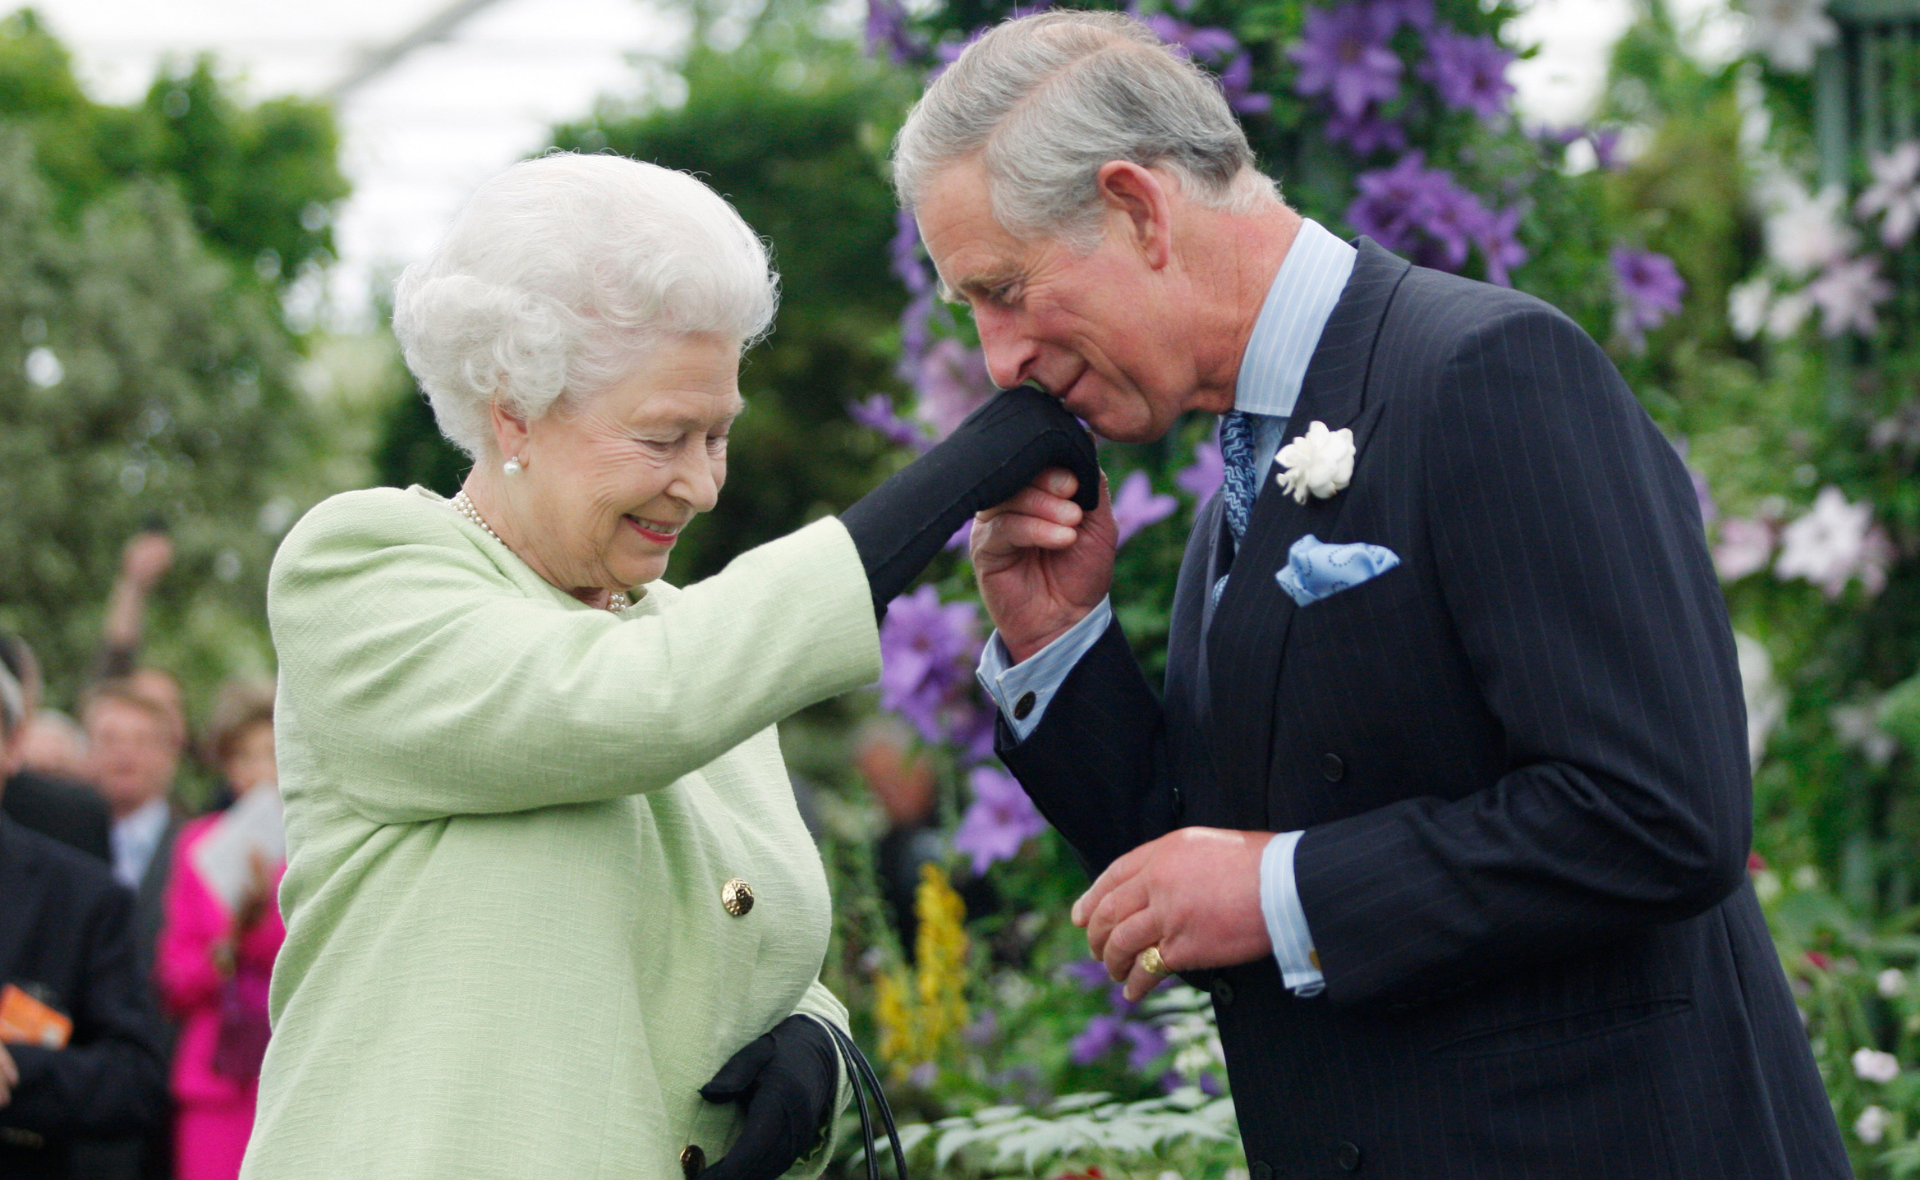 “Darling Mama”: King Charles on his relationship with Queen Elizabeth II